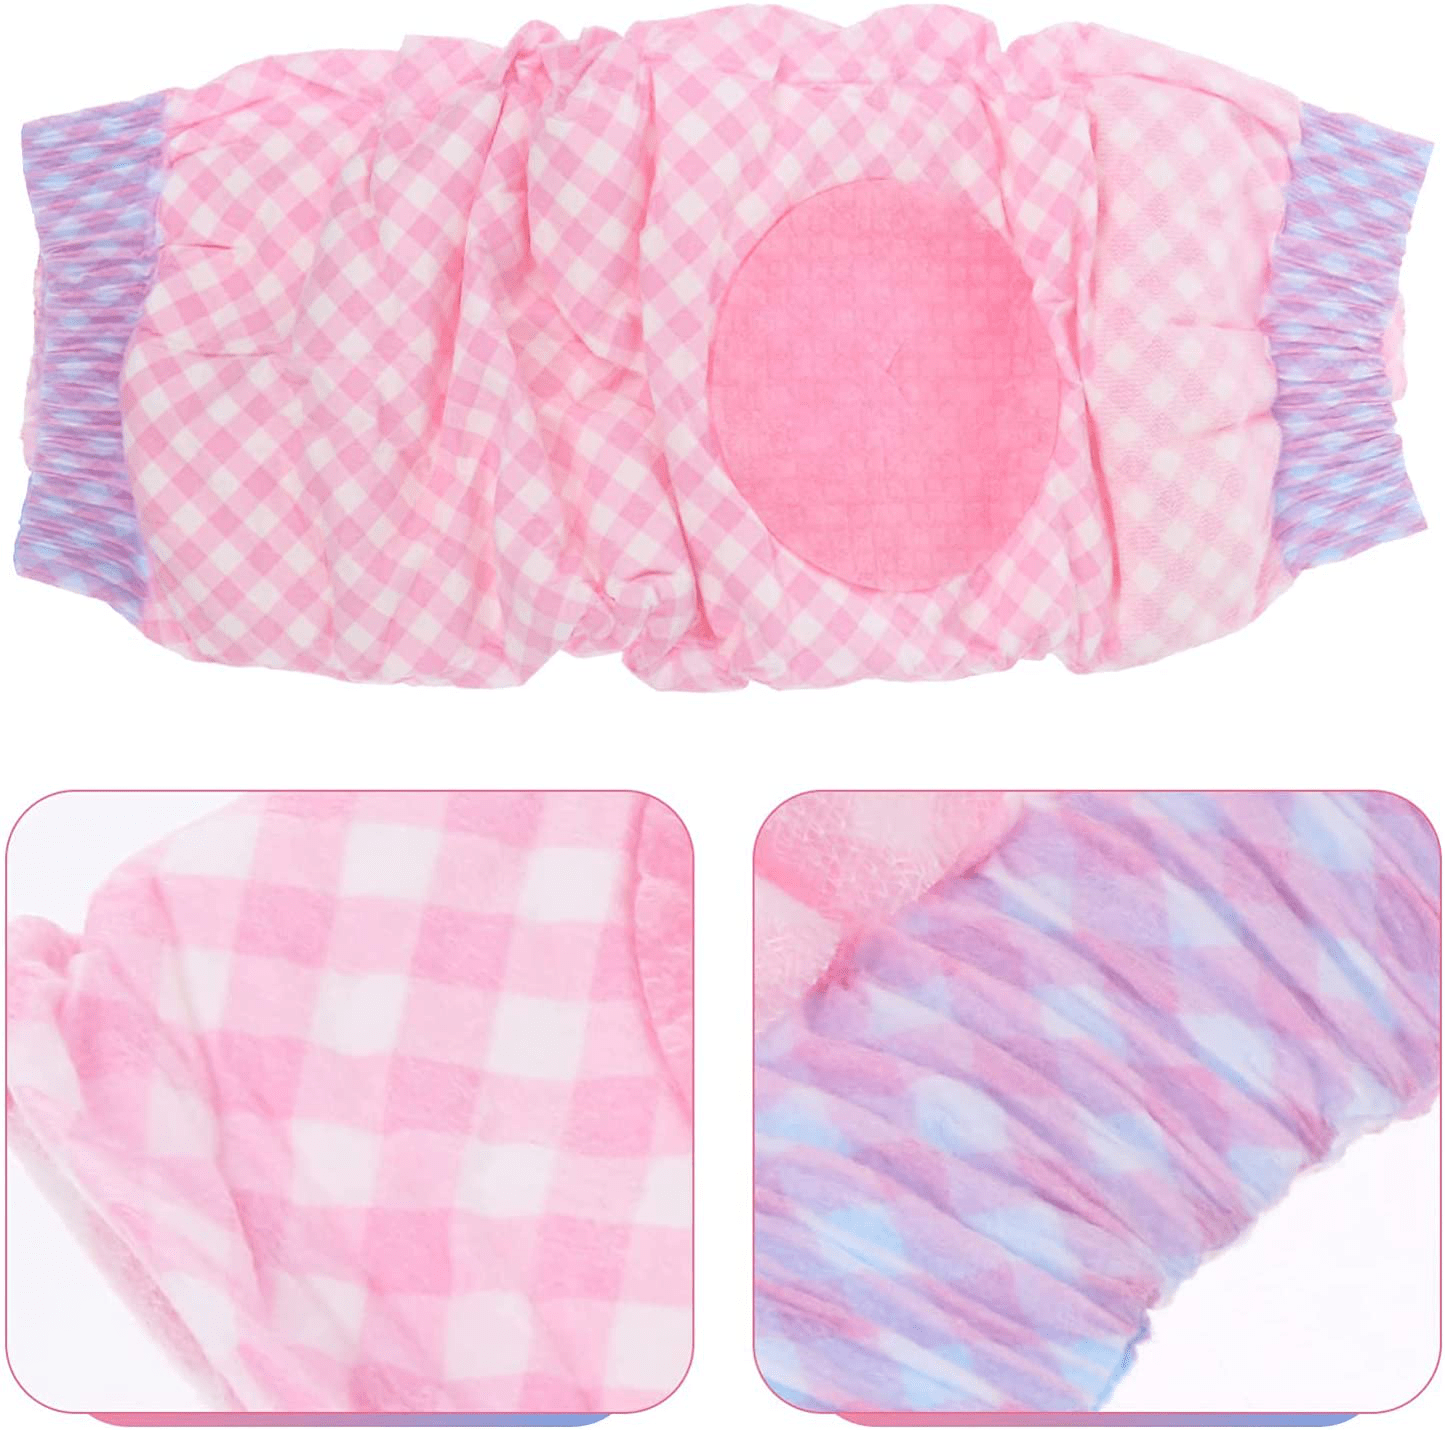 12Pcs Disposable Dog Diaper Doggy Female Diapers Soft Belly Band Male Dog Belly Wraps Super Absorbent Pee Liners Pad Adjustable Size XS (Size : XS)